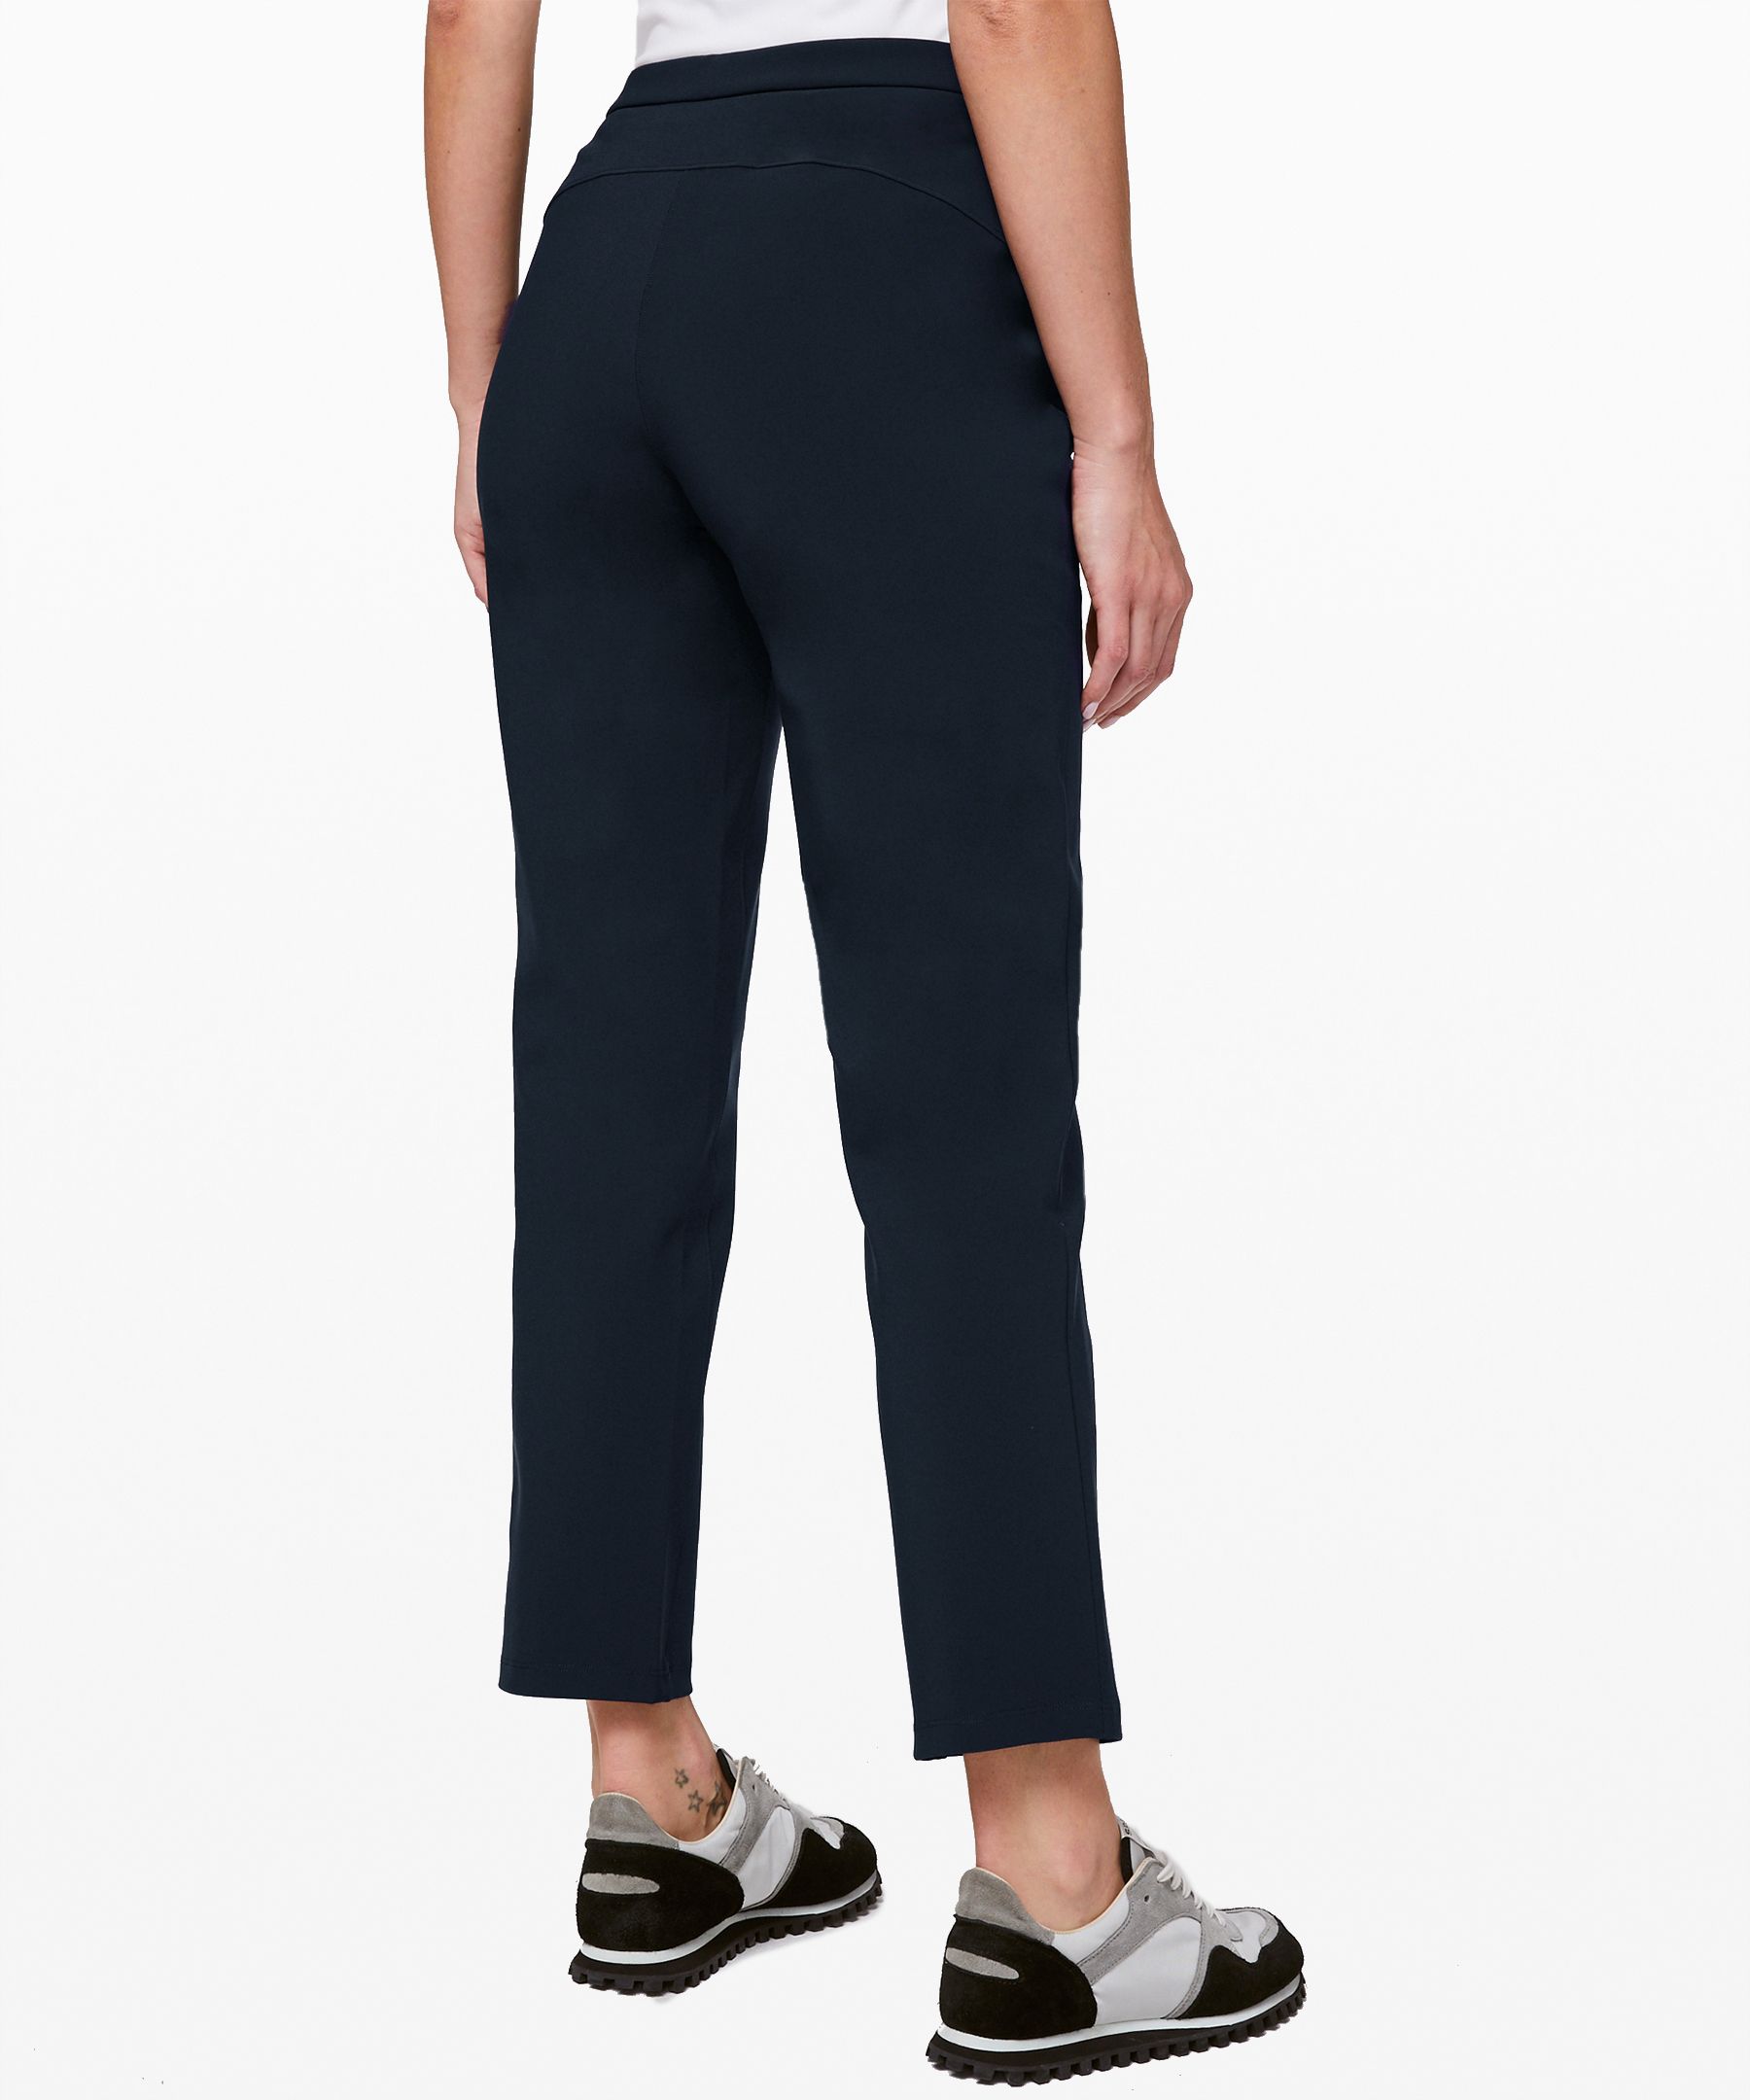 Lululemon On The Move Pant Discontinued 90s